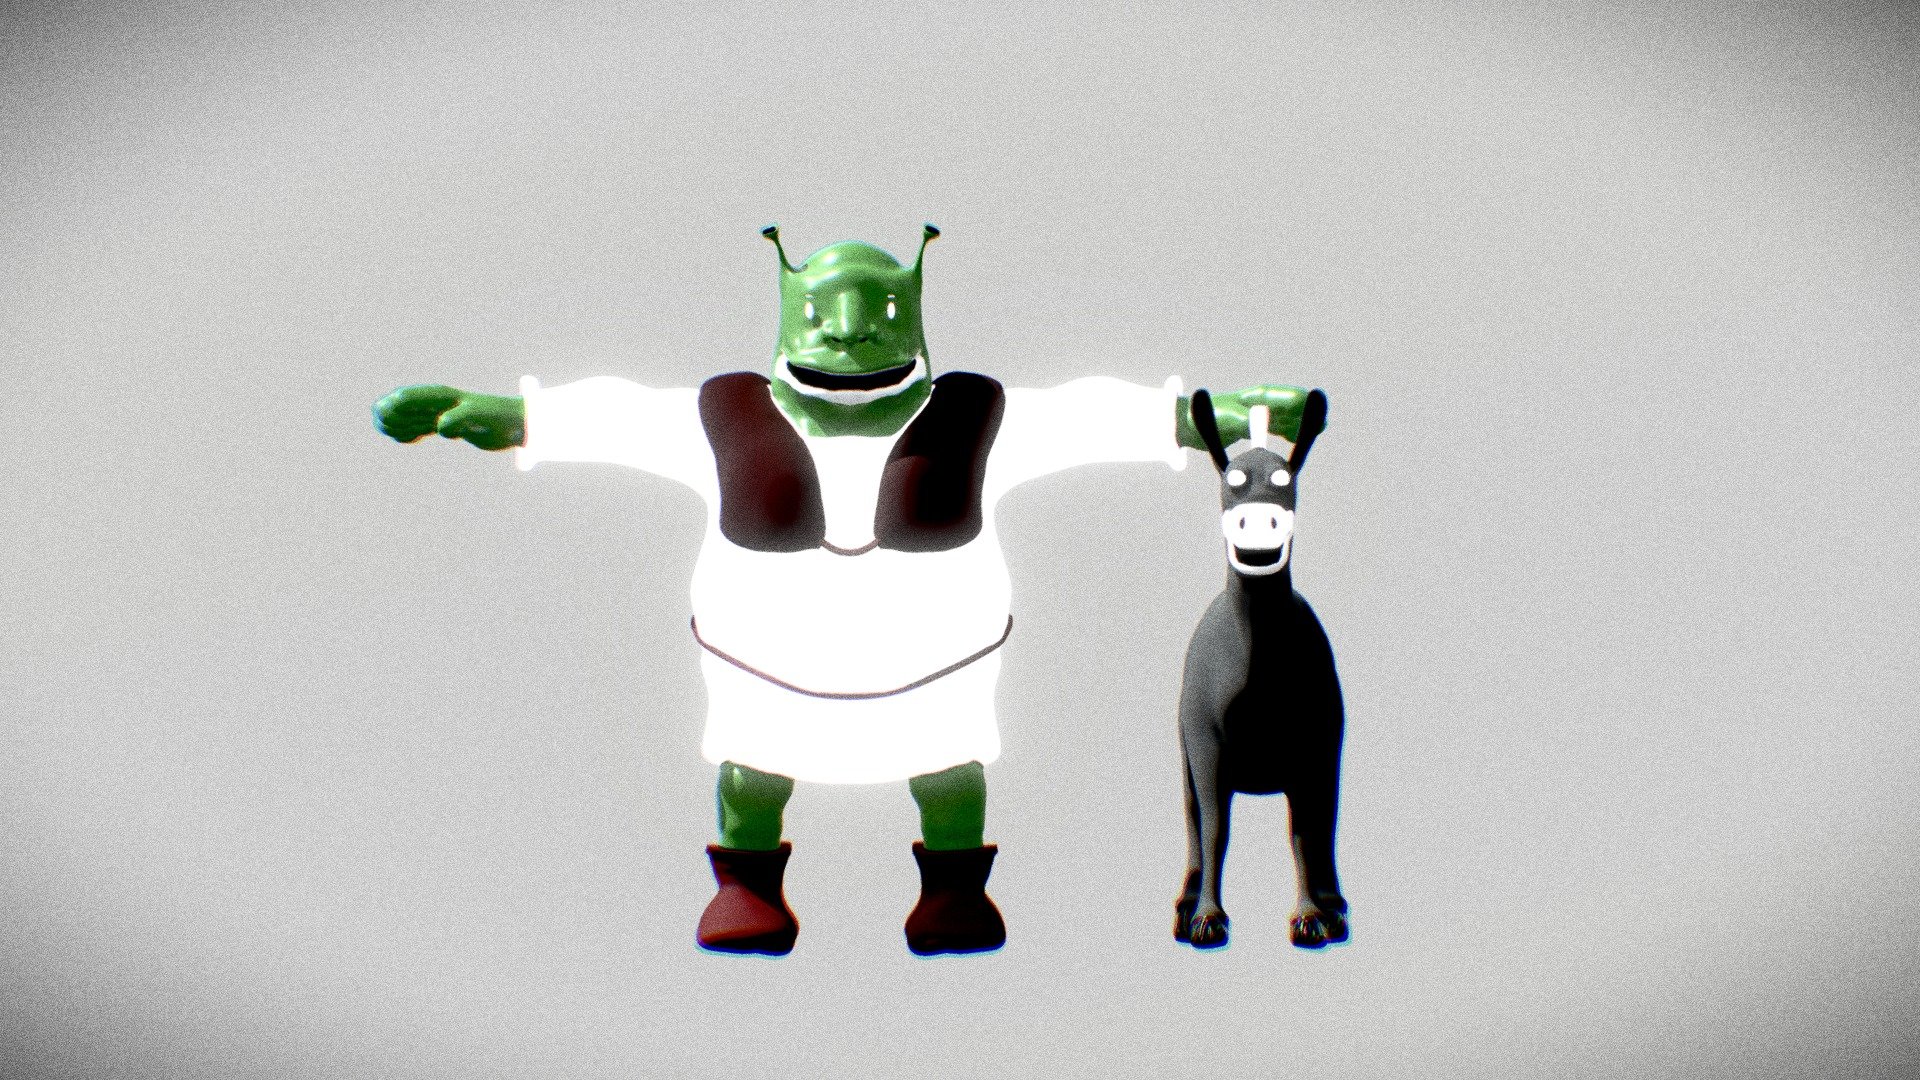 shrek-and-donkey-download-free-3d-model-by-pizzabrian-544e5d2